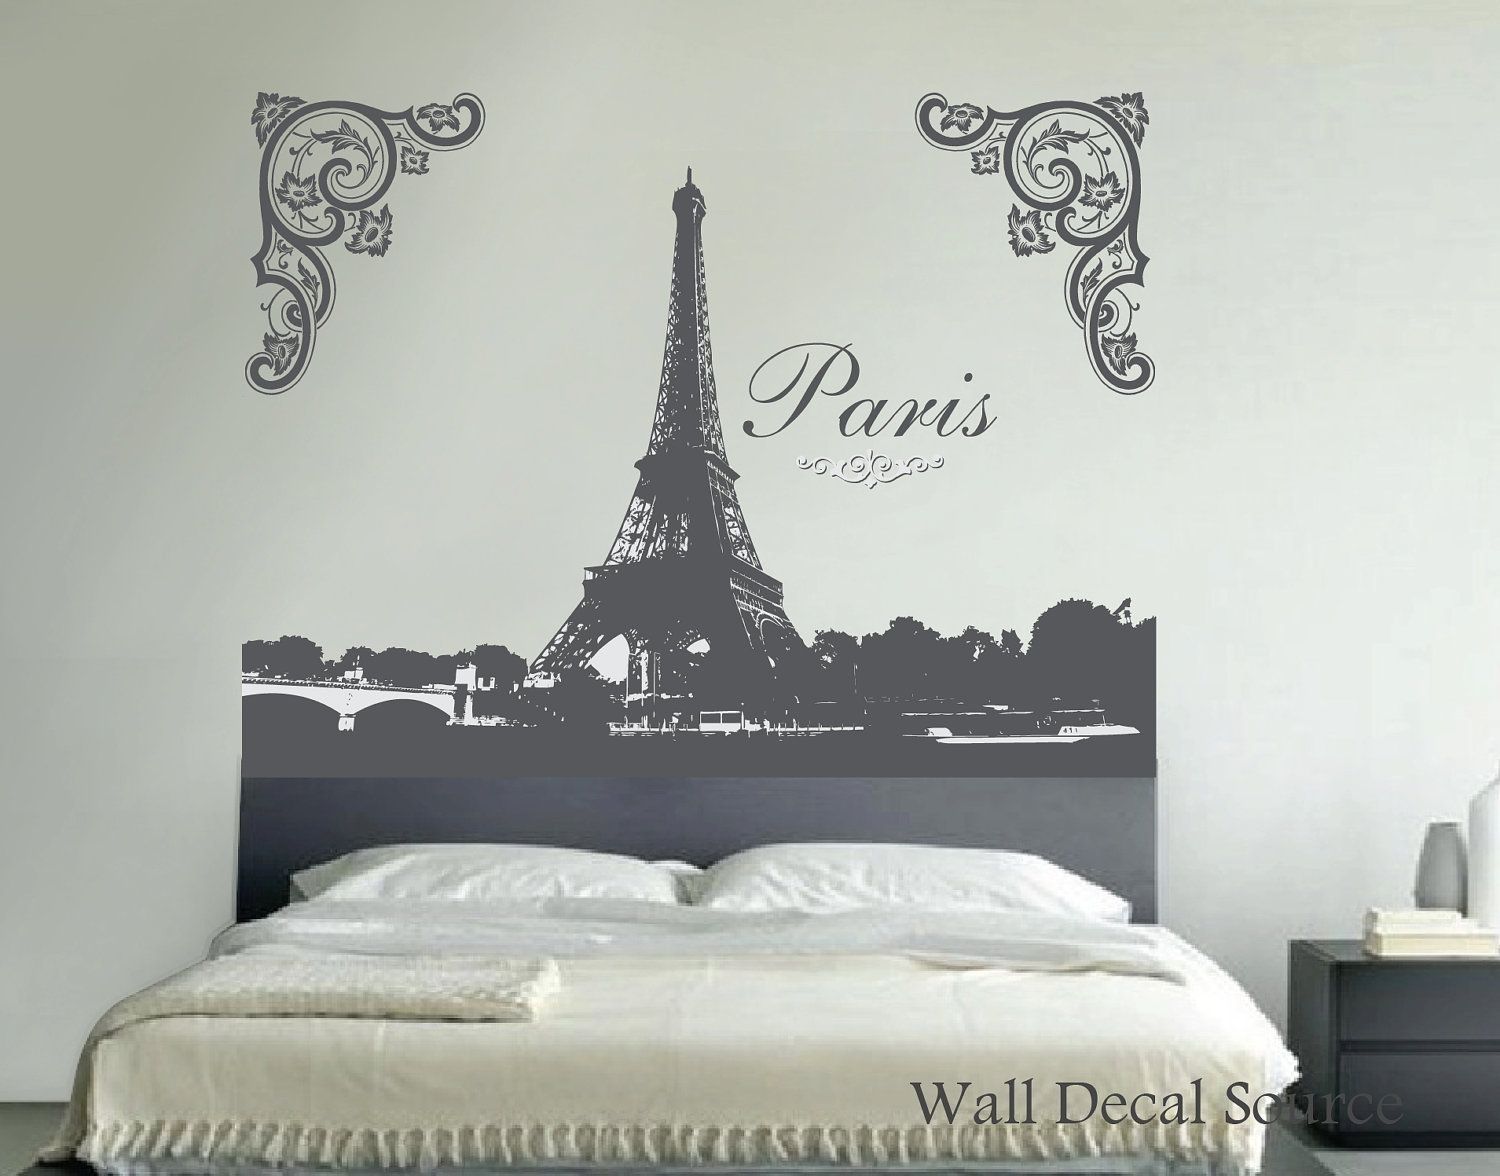 Eiffel Tower Wall Decal Wall Art Decalwalldecalsource, $ (View 9 of 20)